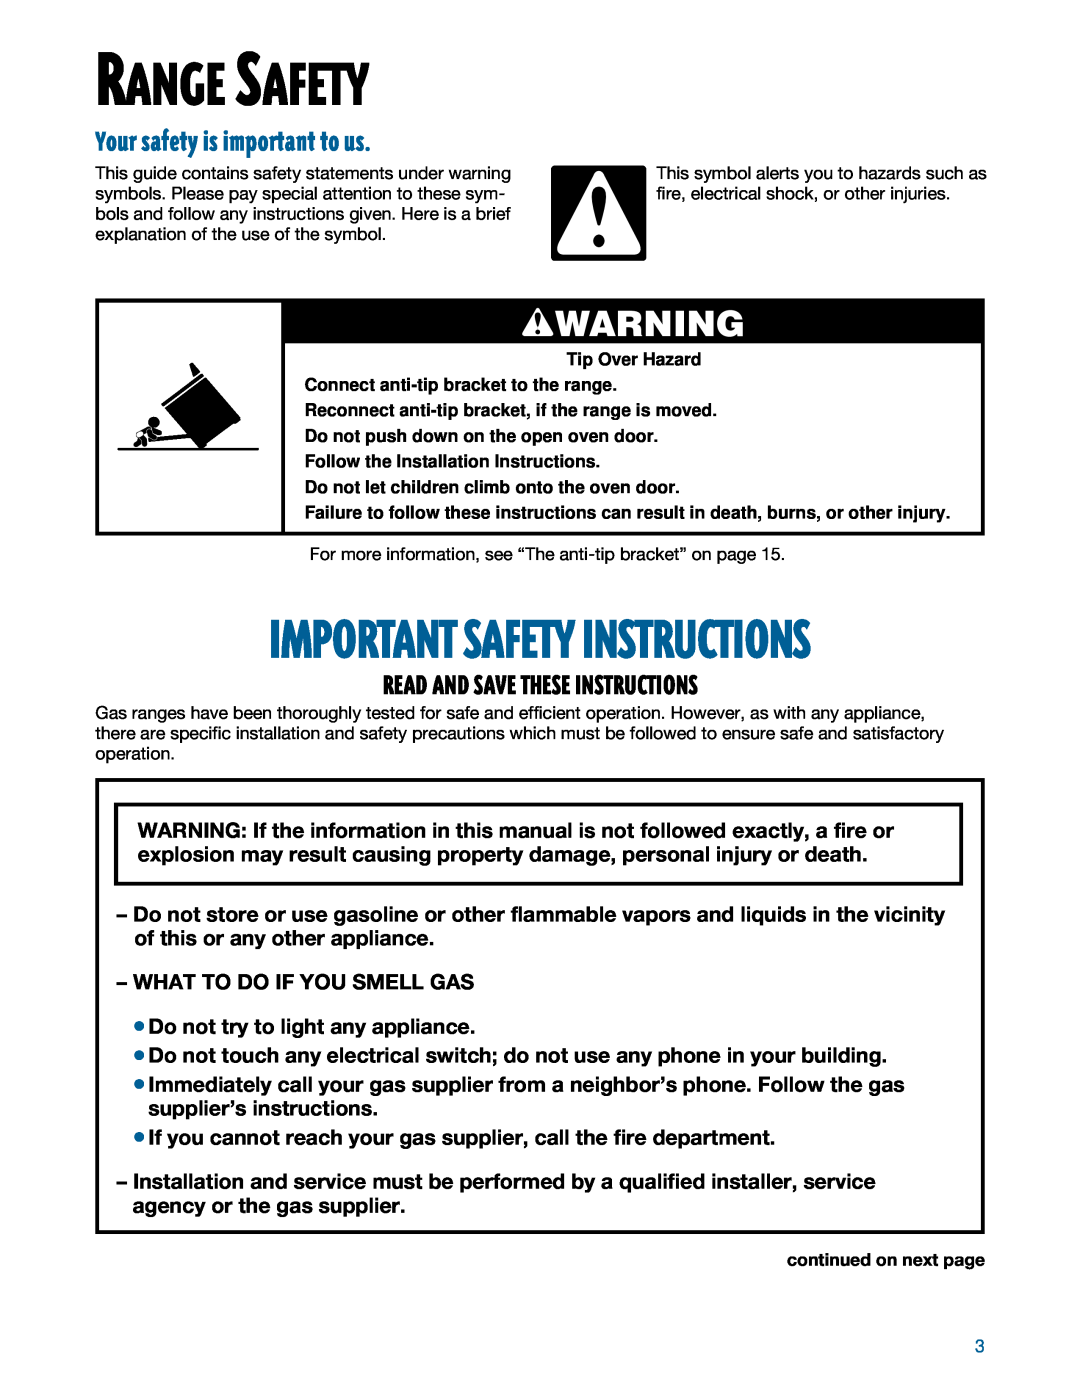 Whirlpool SF350BEE warranty Range Safety, wWARNING, Your safety is important to us, Read And Save These Instructions 